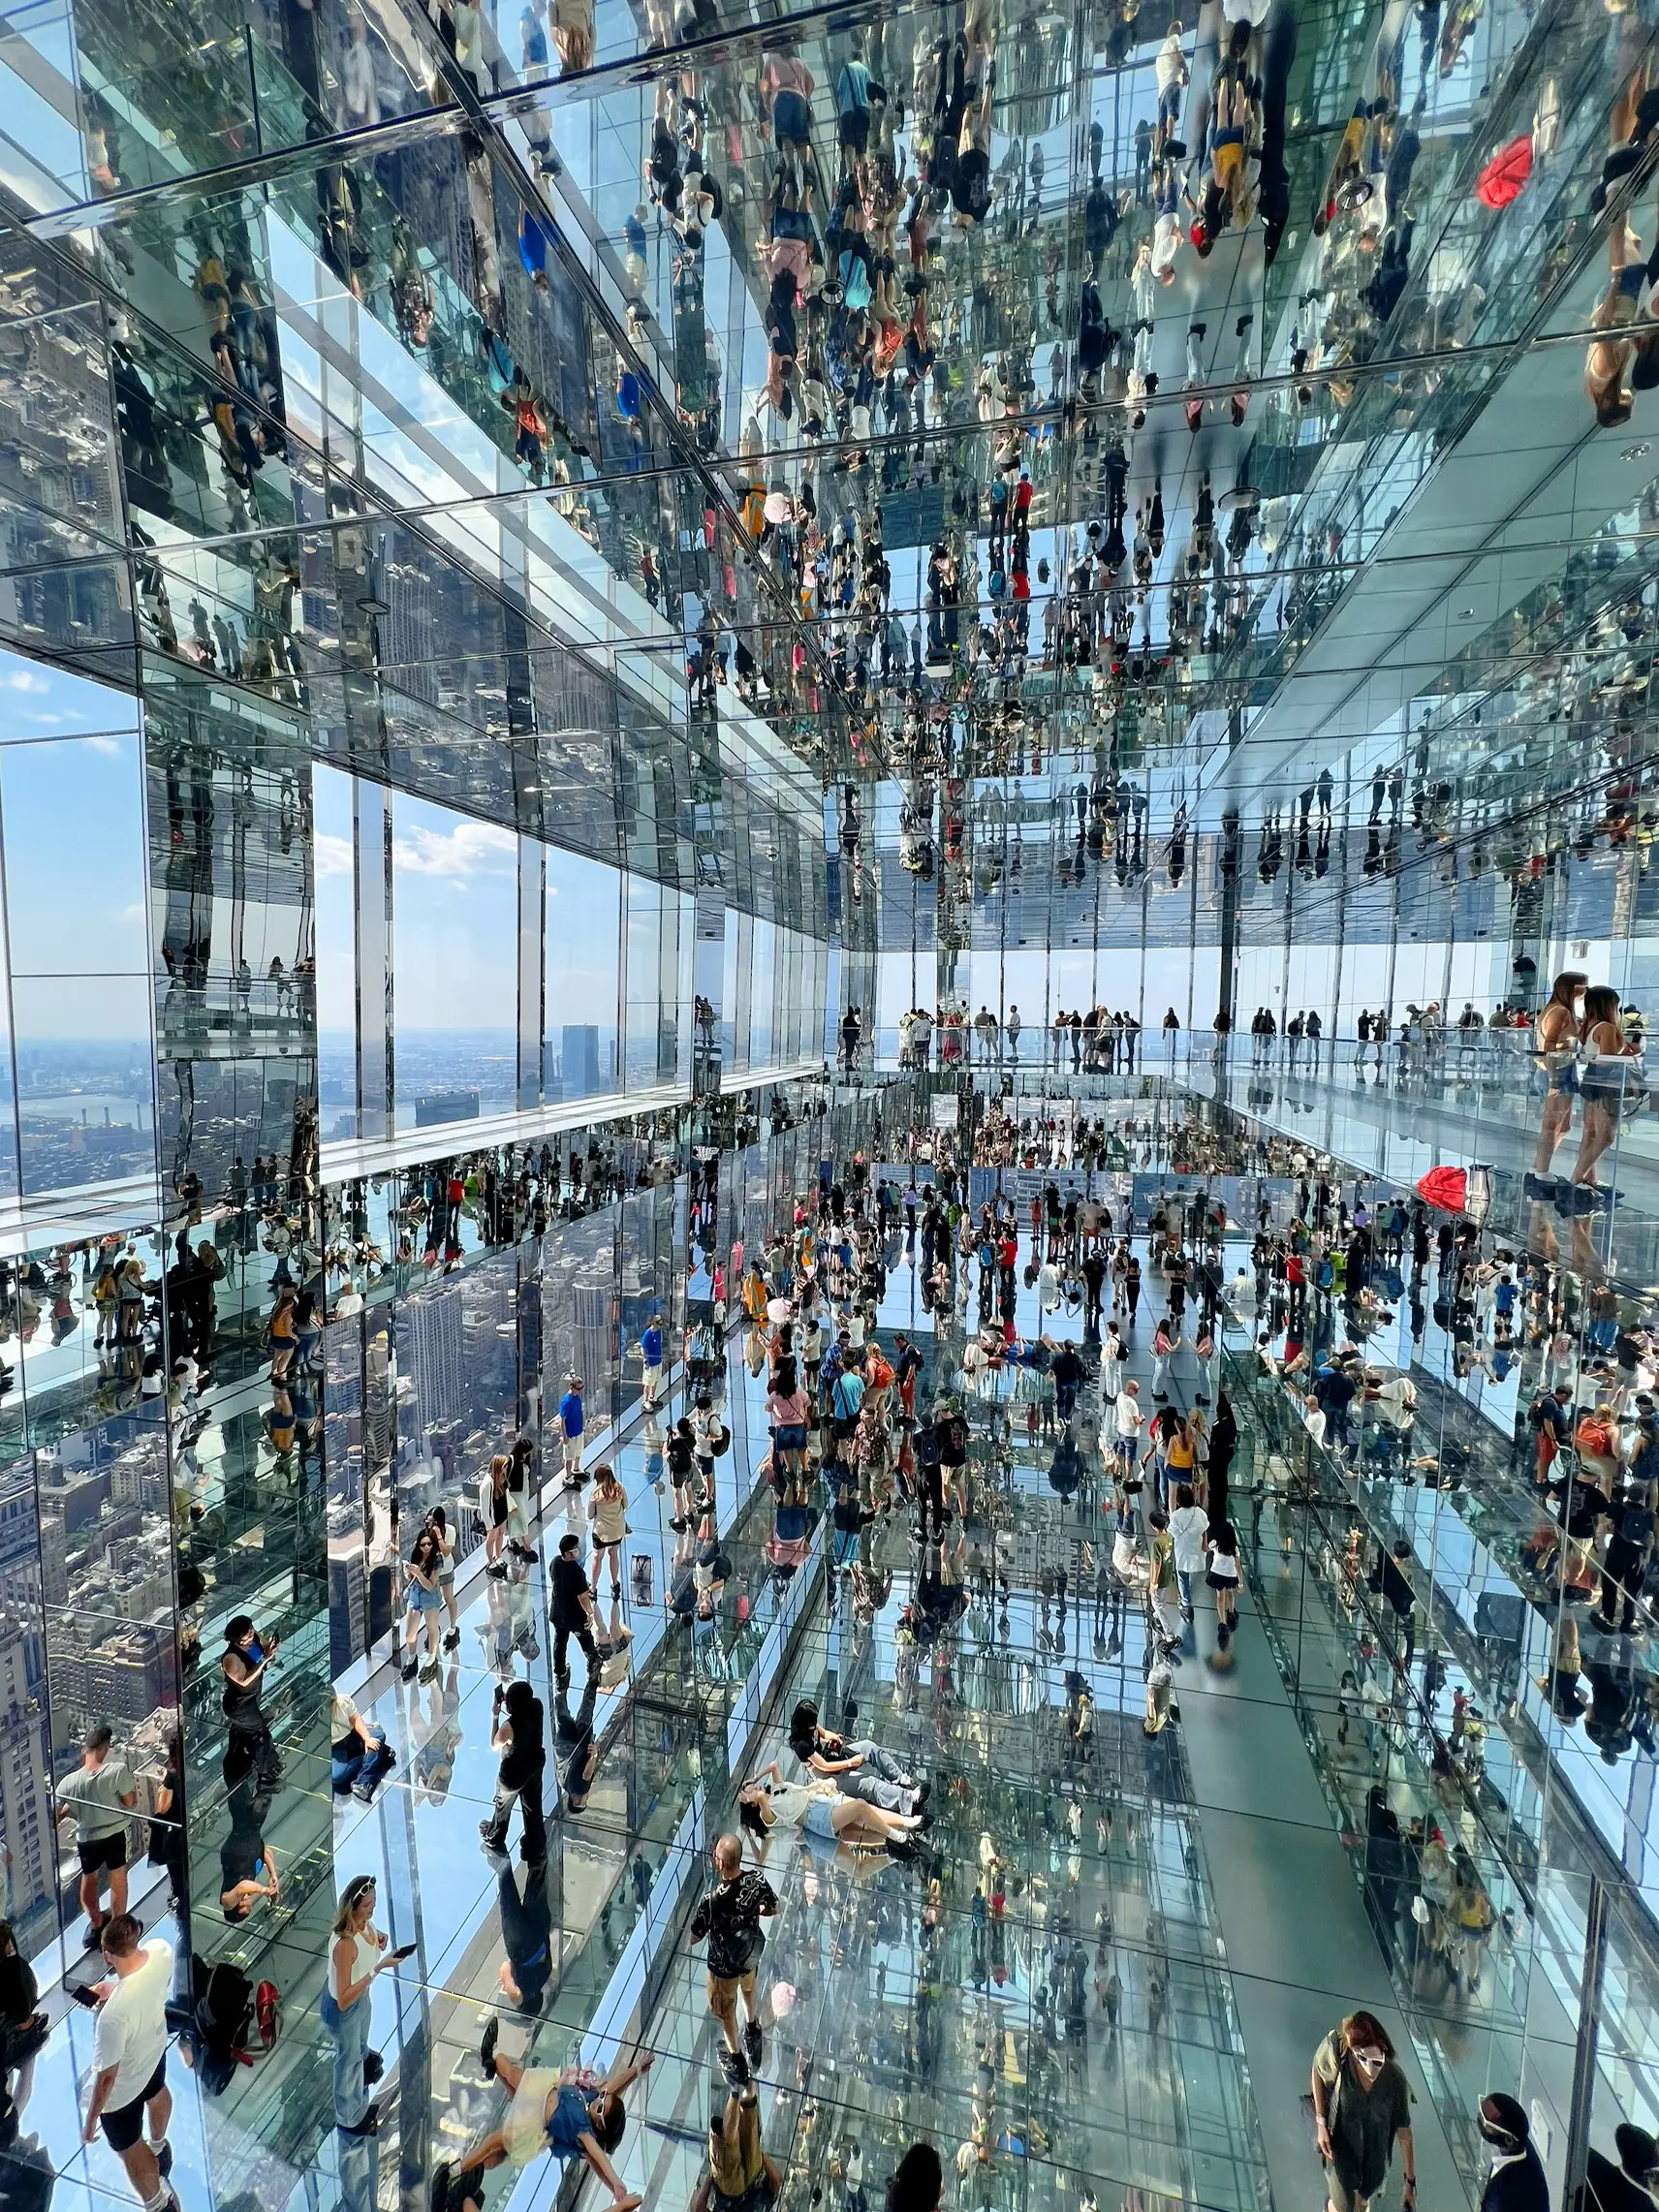  A large group of people are inside a building with a mirrored ceiling. The ceiling is filled with lights, and there are many people standing and walking around. Some people are holding umbrellas, possibly to protect themselves from the sun. The image is